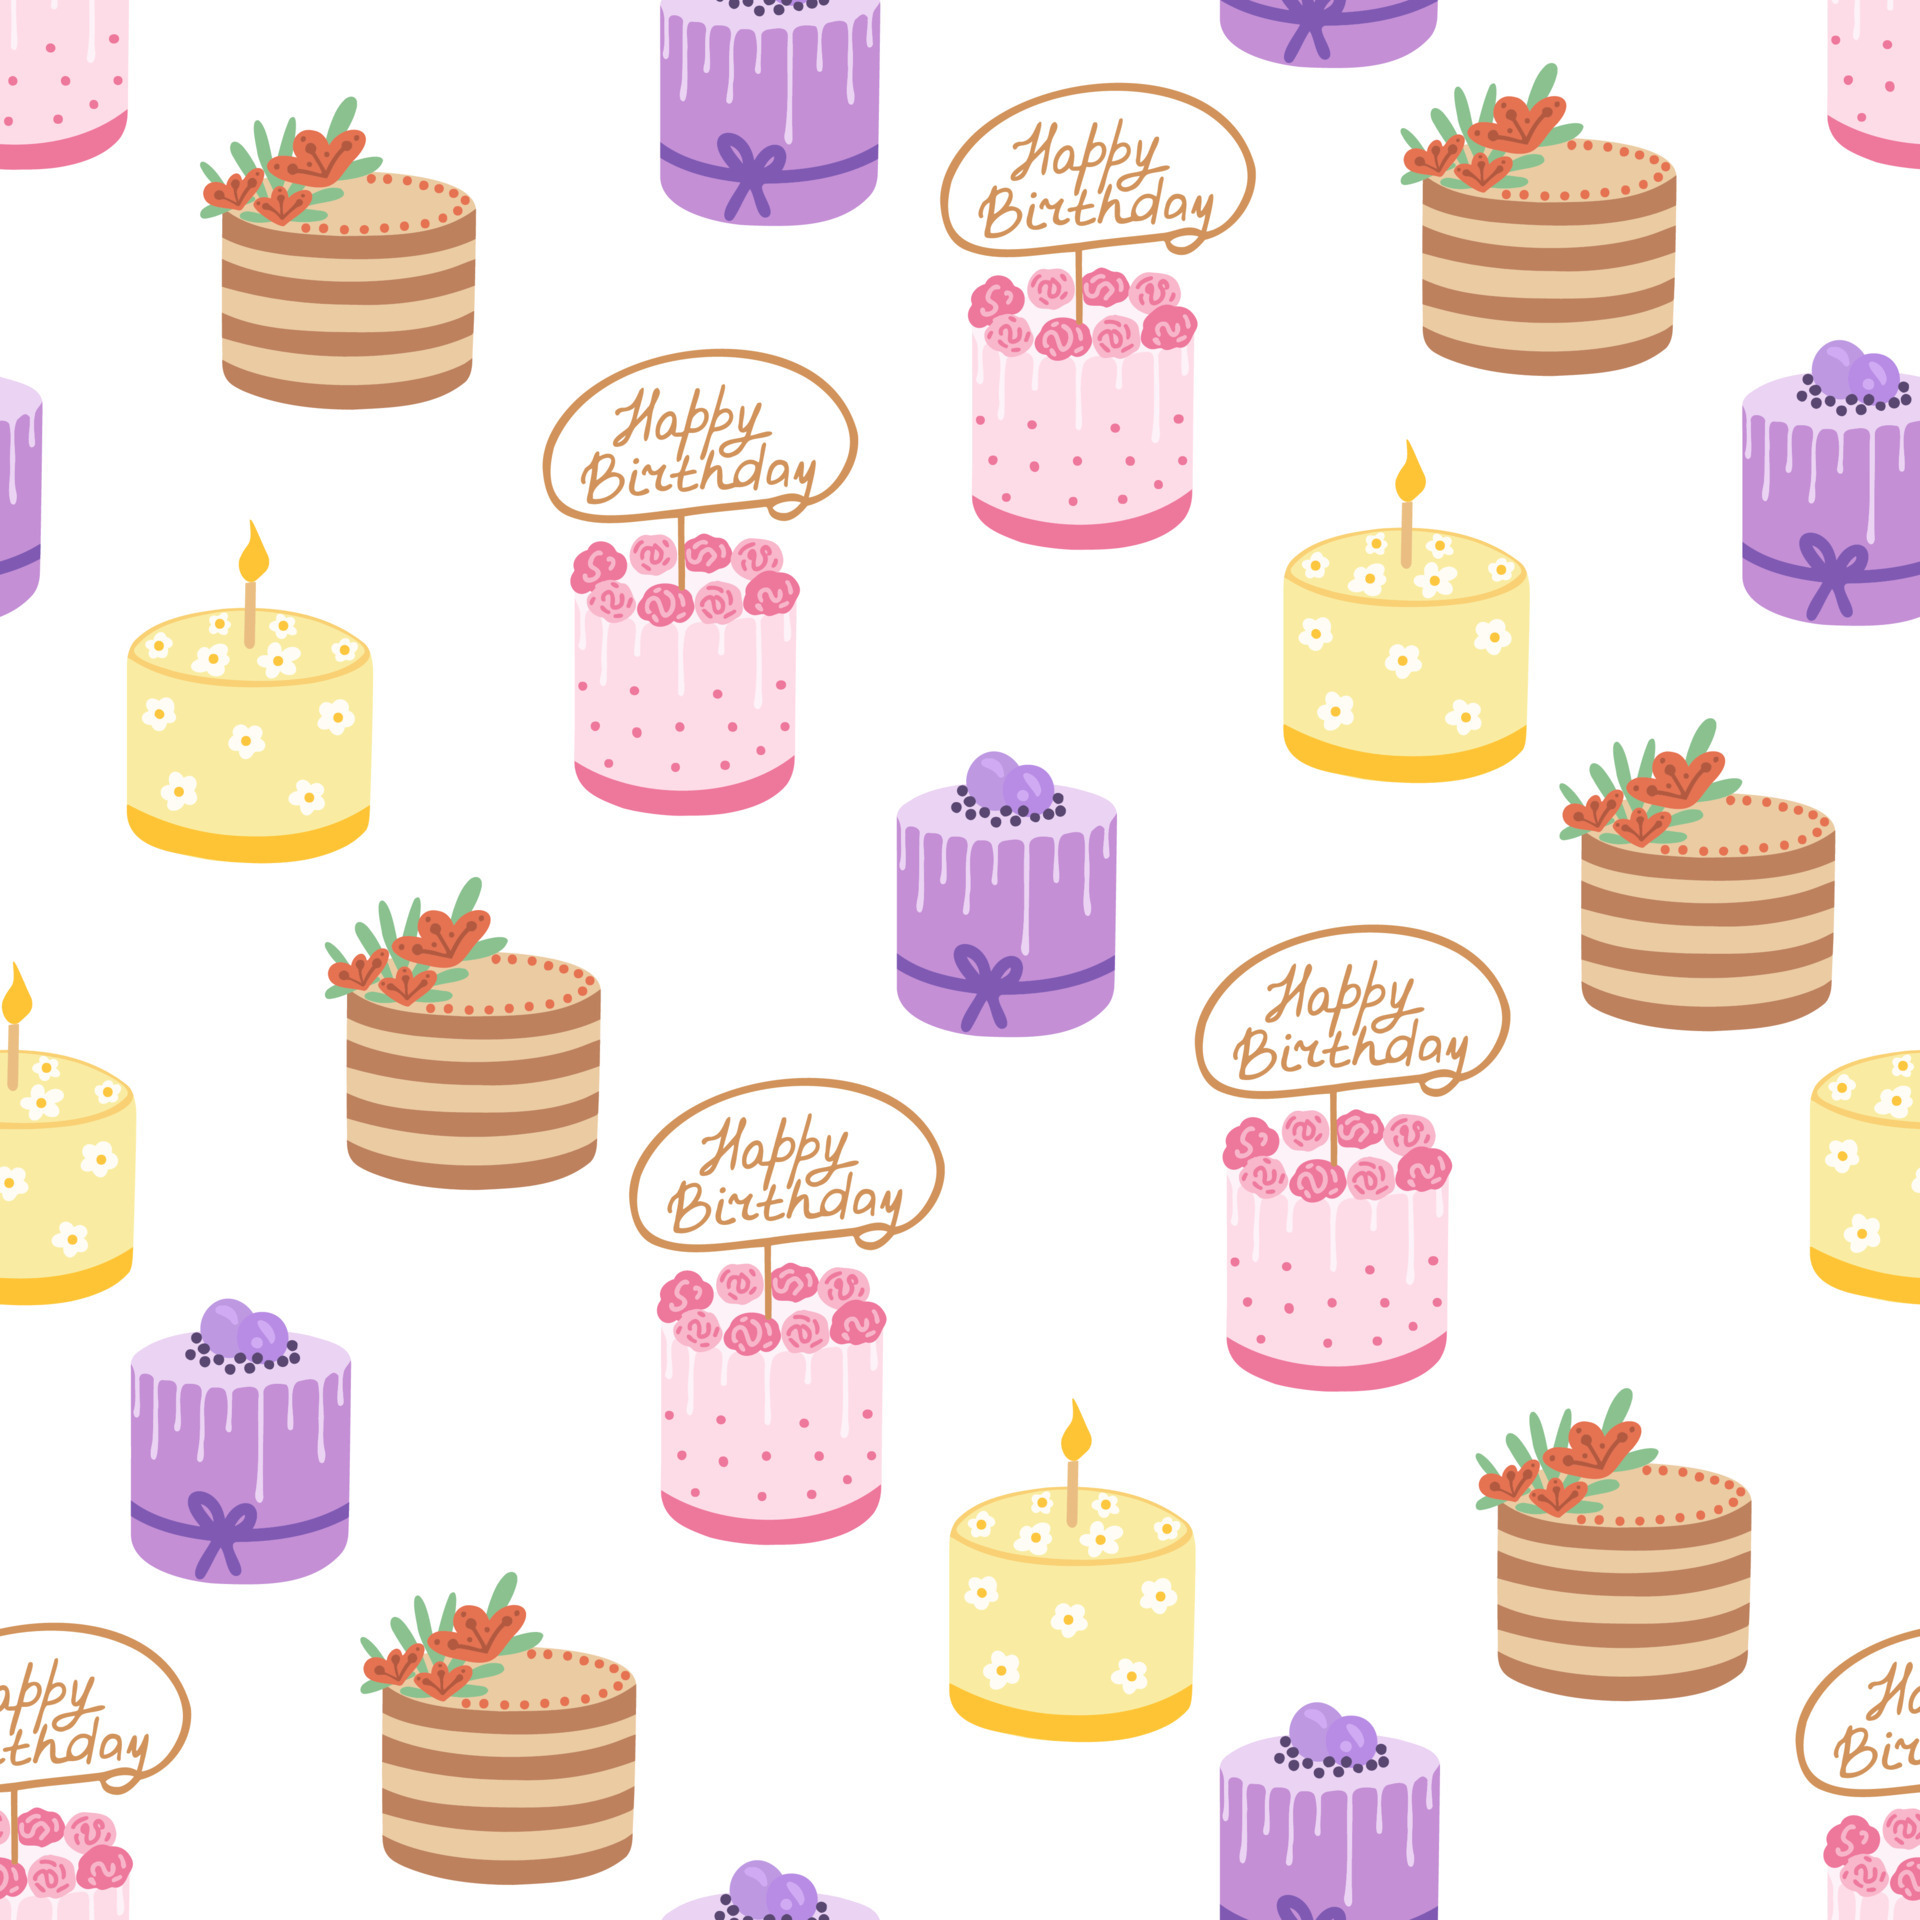 Seamless chocolate cakes pattern | Stock vector | Colourbox